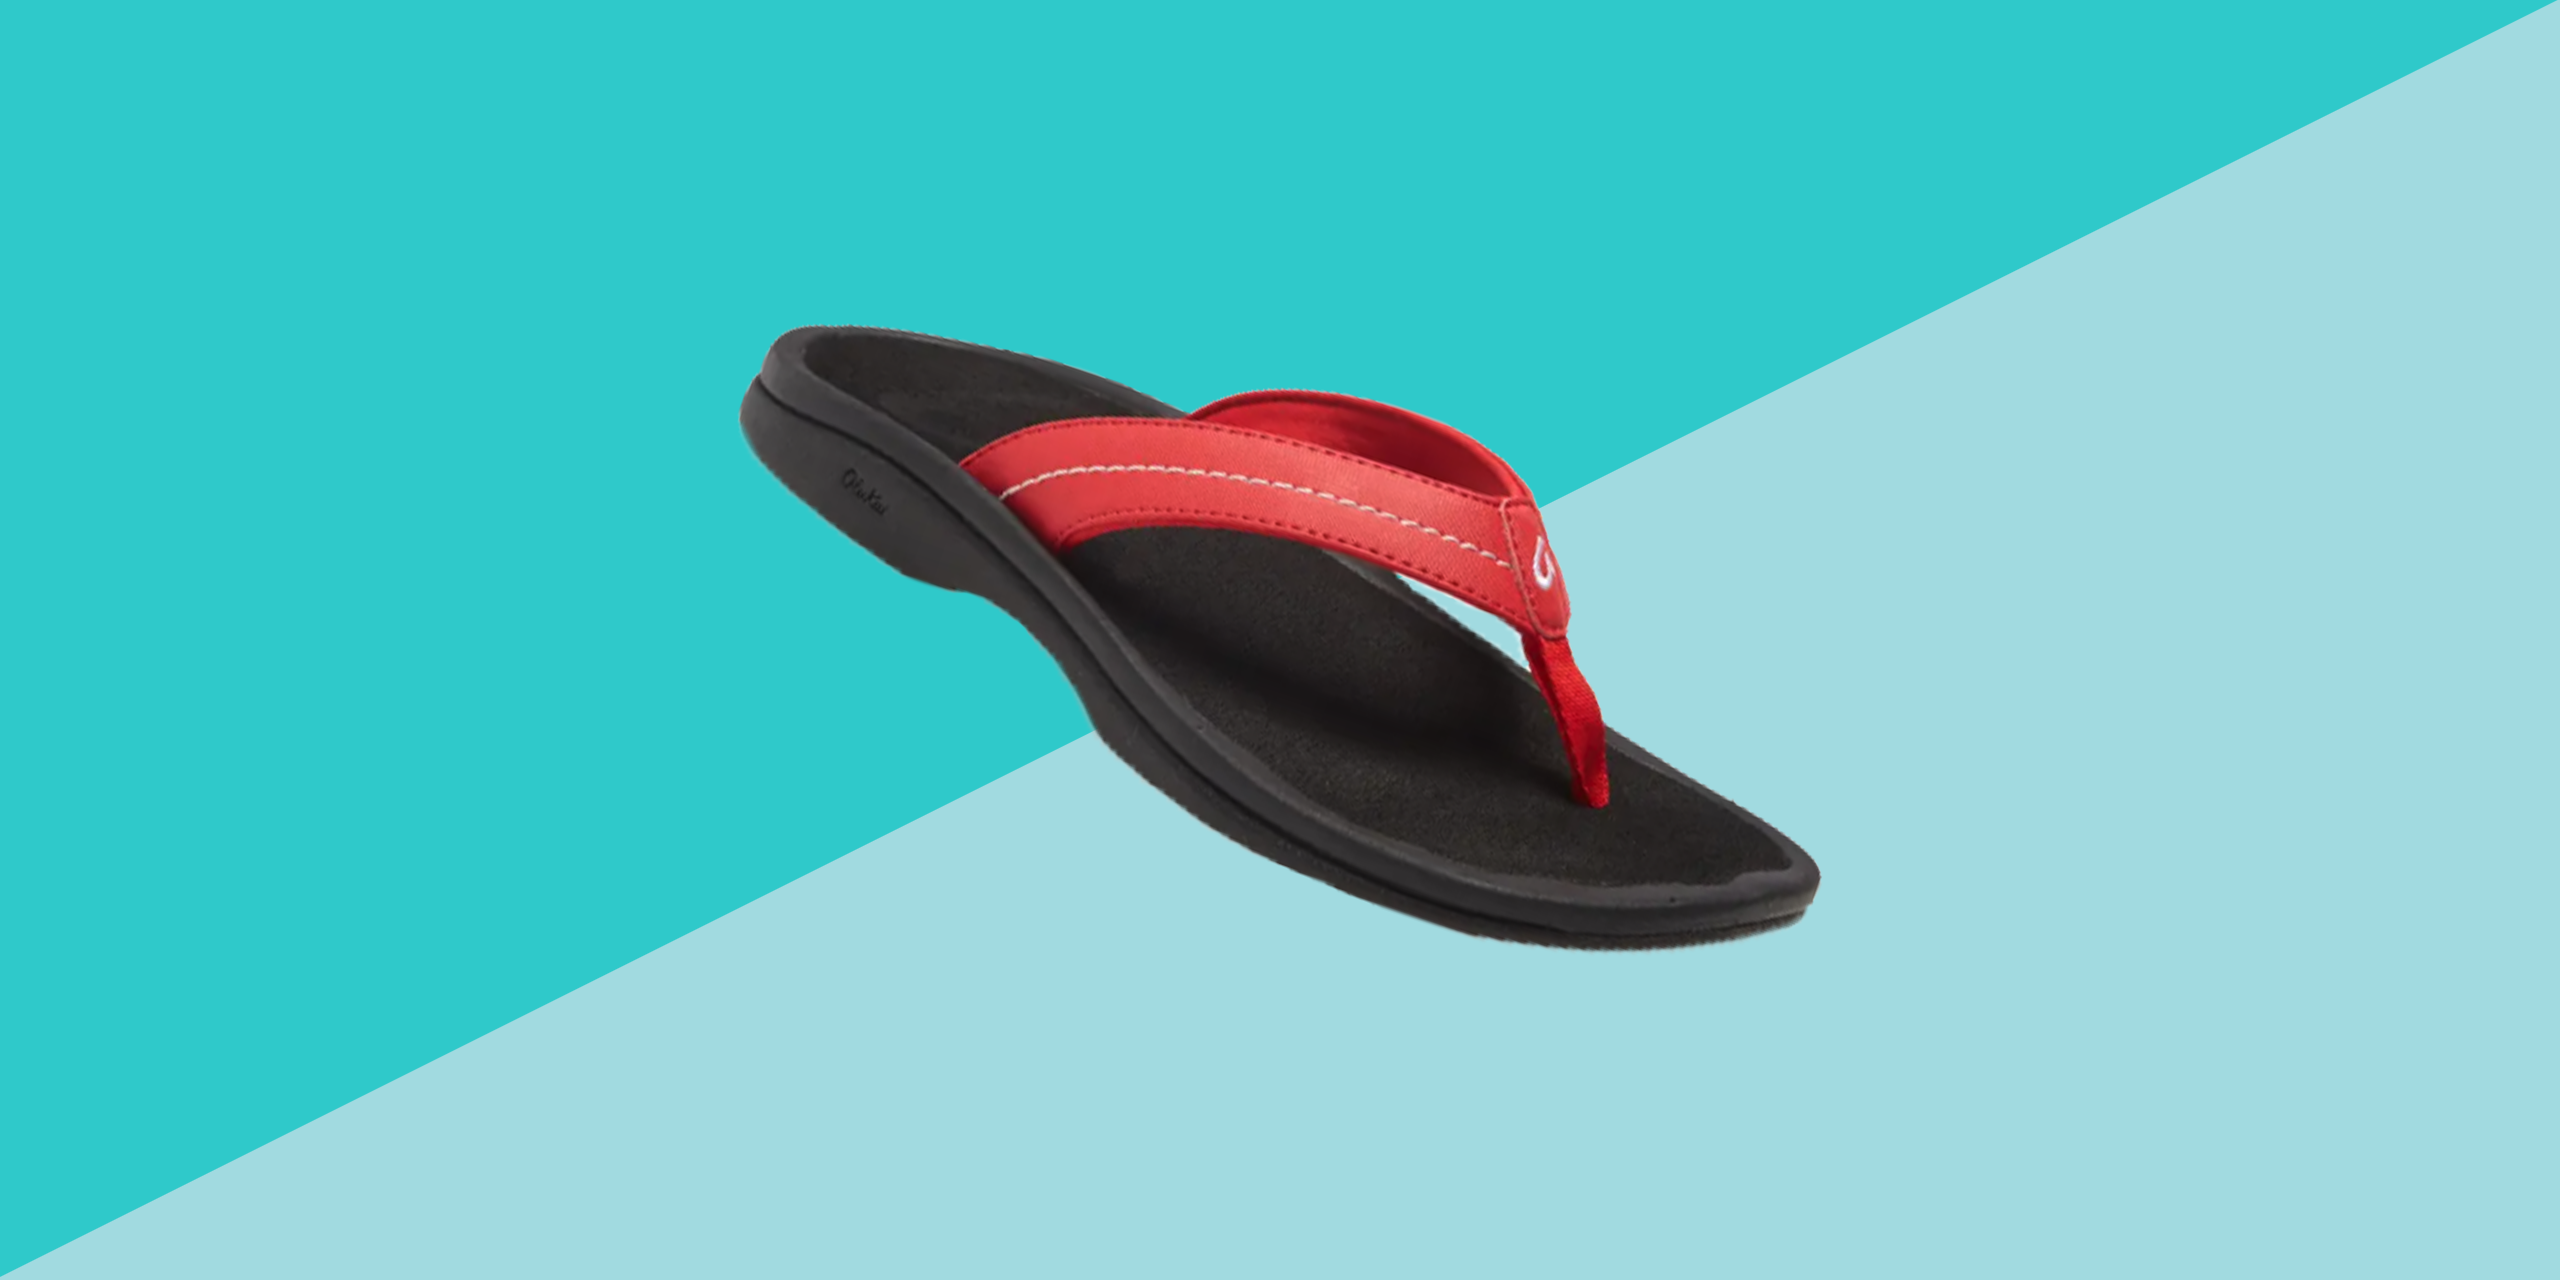 Flip-Flops – 15 Best Flip-Flops With Arch Support 2021, According to Podiatrists